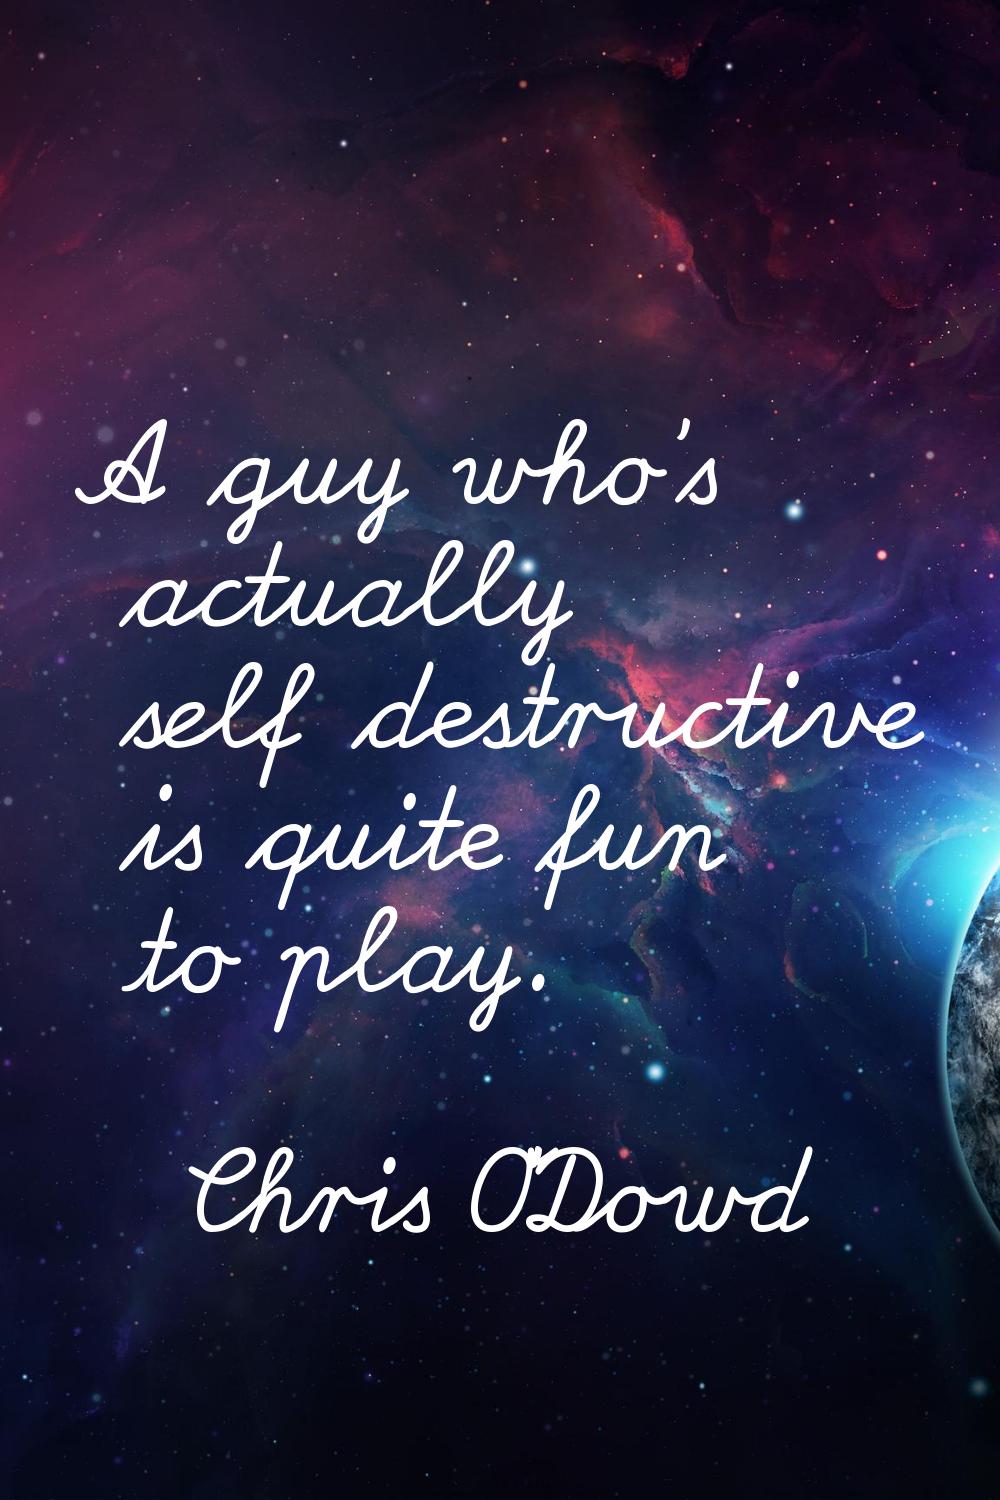 A guy who's actually self destructive is quite fun to play.